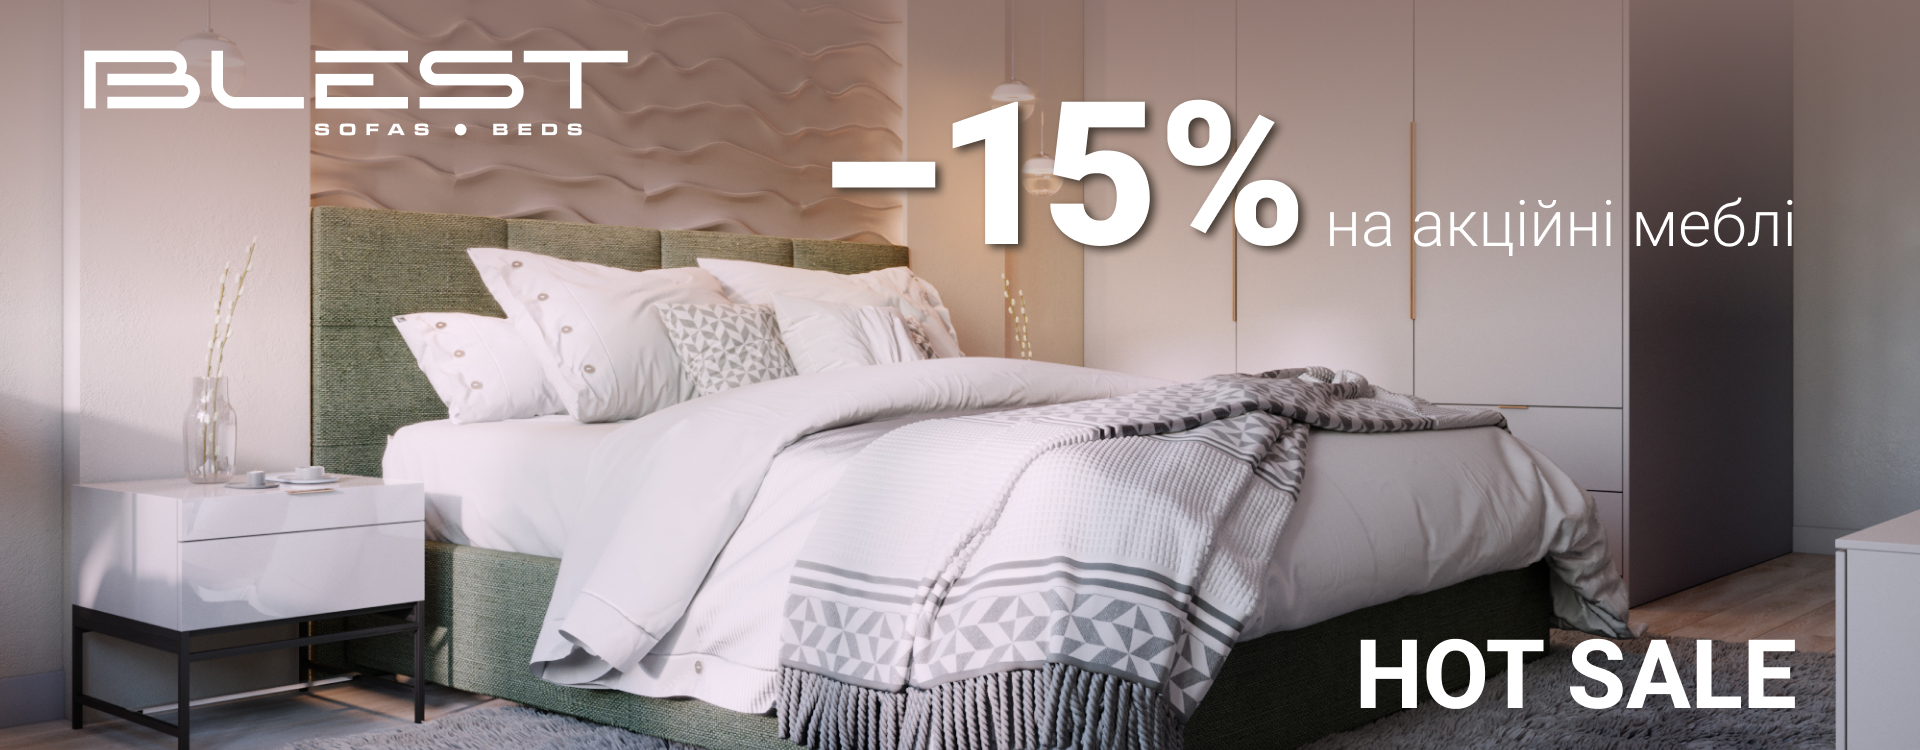 -15% discount on promotional furniture